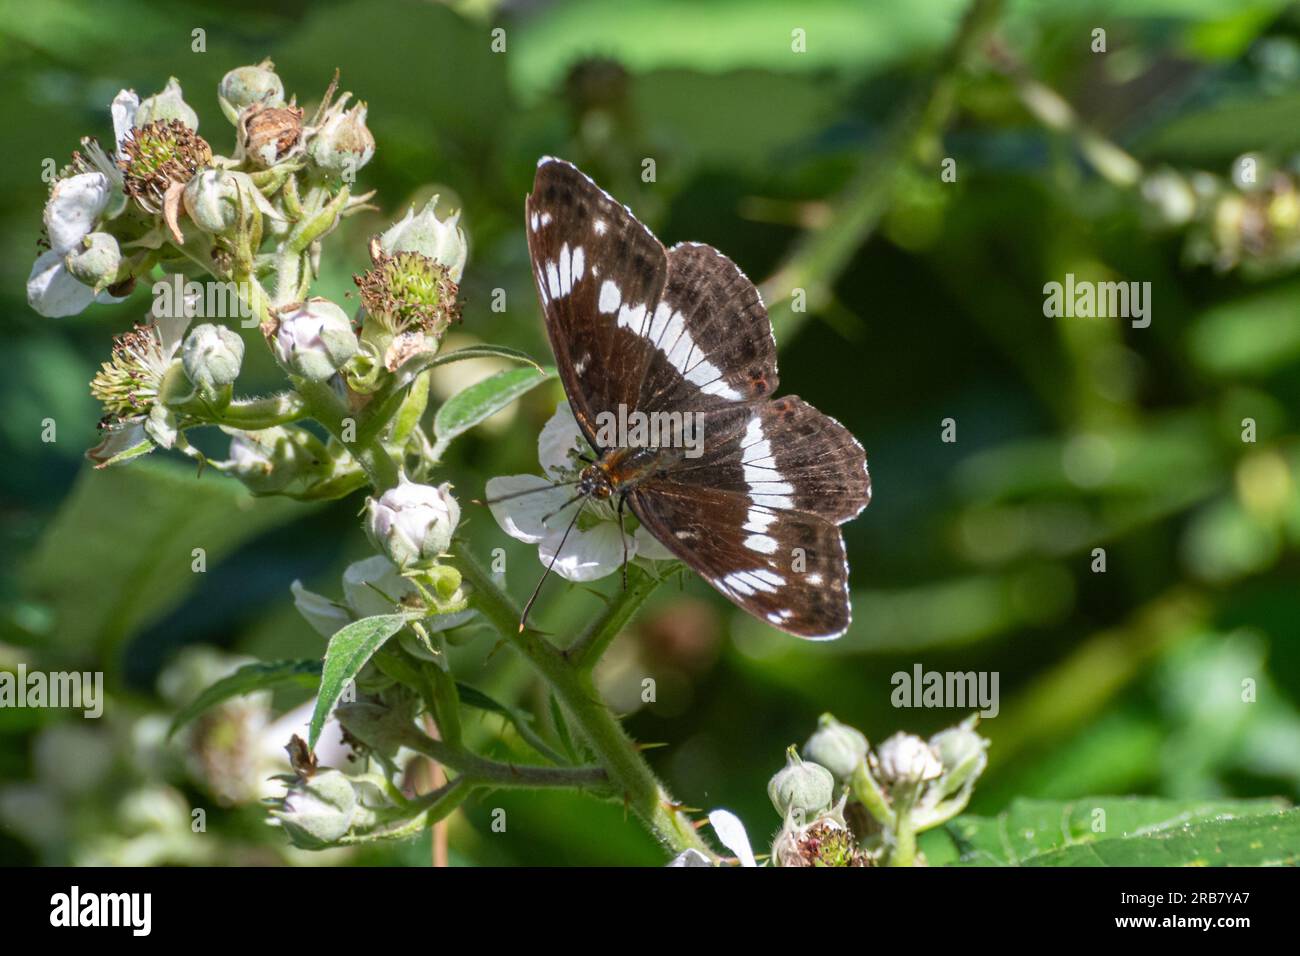 White admiral butterfly (Limenitis camilla) feeding on nectar from bramble flowers in July or summer, Surrey, England, UK Stock Photo